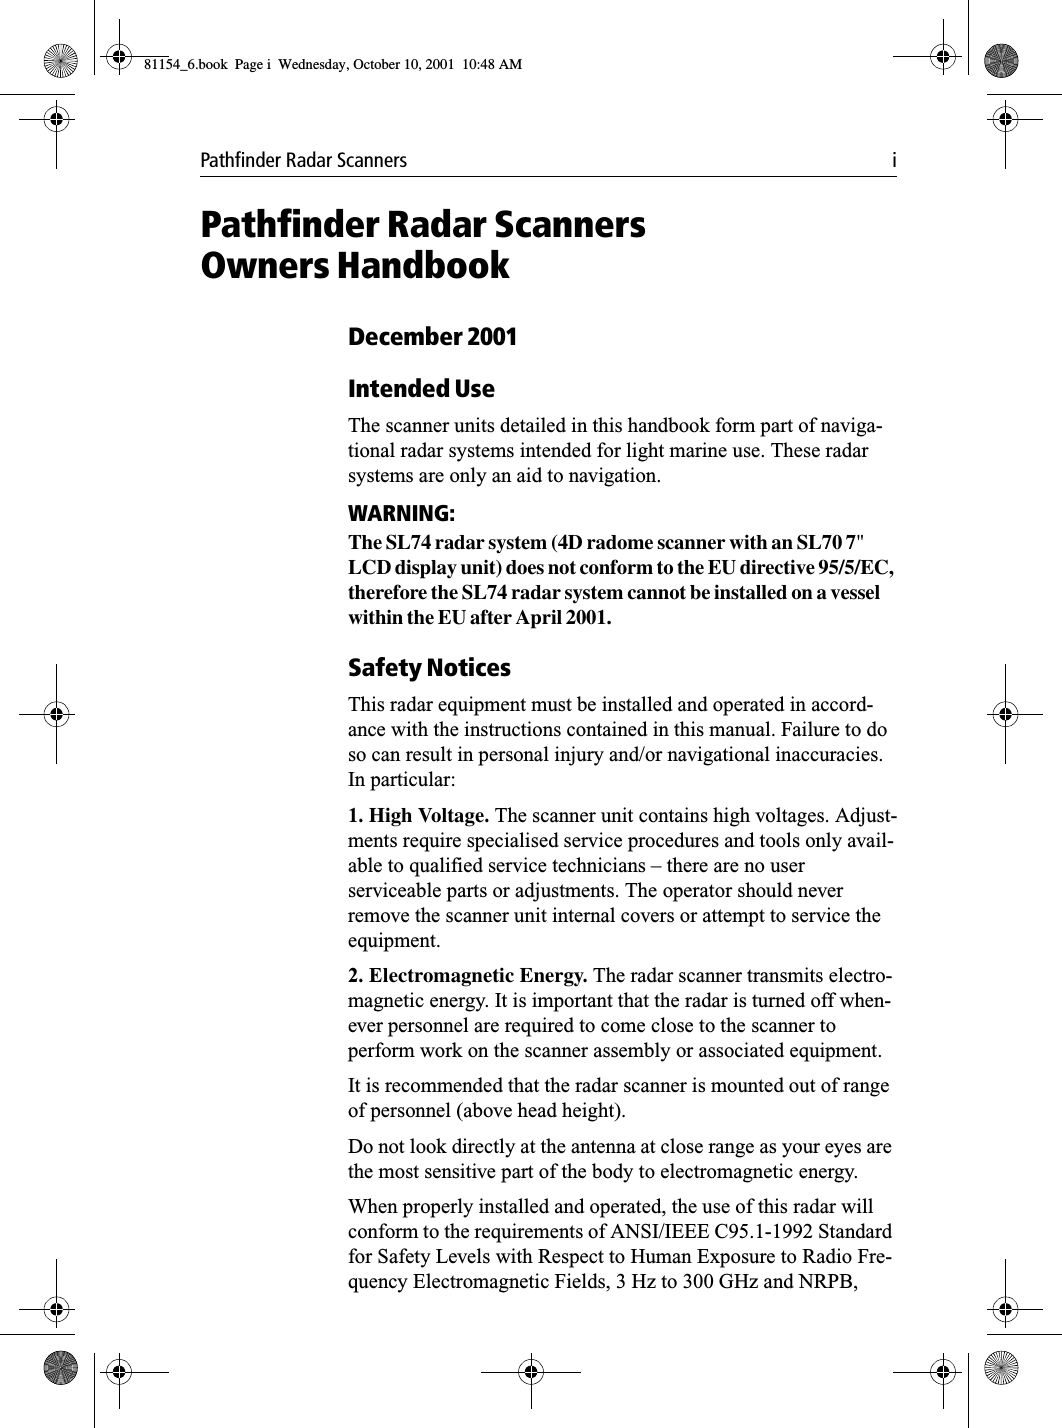 Pathfinder Radar Scanners iPathfinder Radar ScannersOwners HandbookDecember 2001Intended UseThe scanner units detailed in this handbook form part of naviga-tional radar systems intended for light marine use. These radar systems are only an aid to navigation.WARNING:The SL74 radar system (4D radome scanner with an SL70 7&quot; LCD display unit) does not conform to the EU directive 95/5/EC, therefore the SL74 radar system cannot be installed on a vessel within the EU after April 2001.Safety NoticesThis radar equipment must be installed and operated in accord-ance with the instructions contained in this manual. Failure to do so can result in personal injury and/or navigational inaccuracies. In particular:1. High Voltage. The scanner unit contains high voltages. Adjust-ments require specialised service procedures and tools only avail-able to qualified service technicians – there are no user serviceable parts or adjustments. The operator should never remove the scanner unit internal covers or attempt to service the equipment.2. Electromagnetic Energy. The radar scanner transmits electro-magnetic energy. It is important that the radar is turned off when-ever personnel are required to come close to the scanner to perform work on the scanner assembly or associated equipment.It is recommended that the radar scanner is mounted out of range of personnel (above head height).Do not look directly at the antenna at close range as your eyes are the most sensitive part of the body to electromagnetic energy.When properly installed and operated, the use of this radar will conform to the requirements of ANSI/IEEE C95.1-1992 Standard for Safety Levels with Respect to Human Exposure to Radio Fre-quency Electromagnetic Fields, 3 Hz to 300 GHz and NRPB, 81154_6.book  Page i  Wednesday, October 10, 2001  10:48 AM